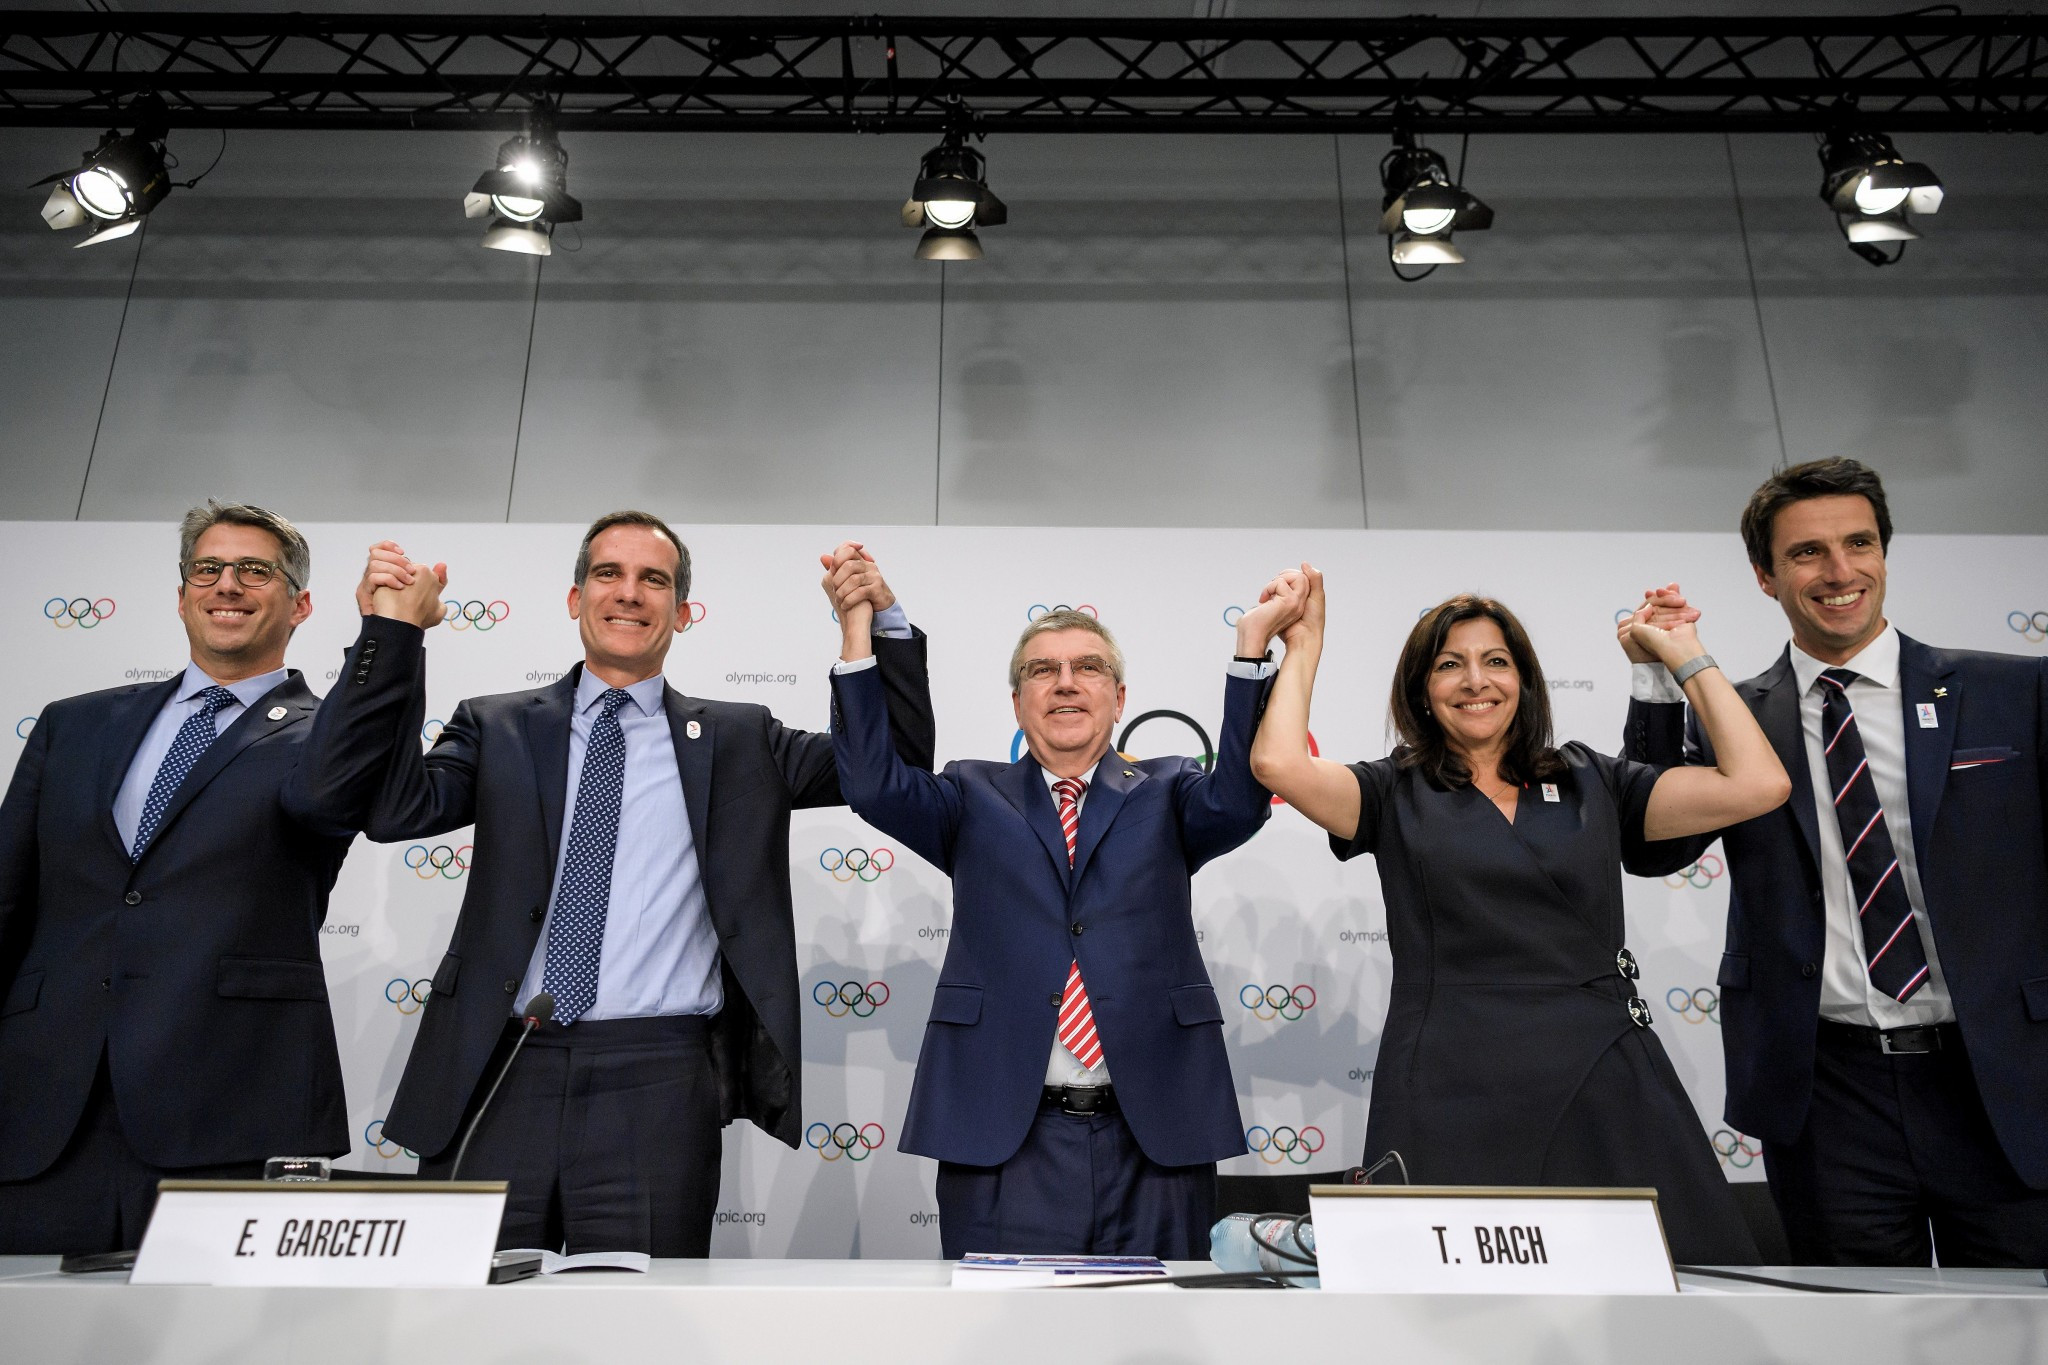 The IOC are set to ratify the plan to have Paris host the 2024 Olympics and Paralympics and Los Angeles stage the 2028 Games at their Session in Lima on September 13 ©Getty Images